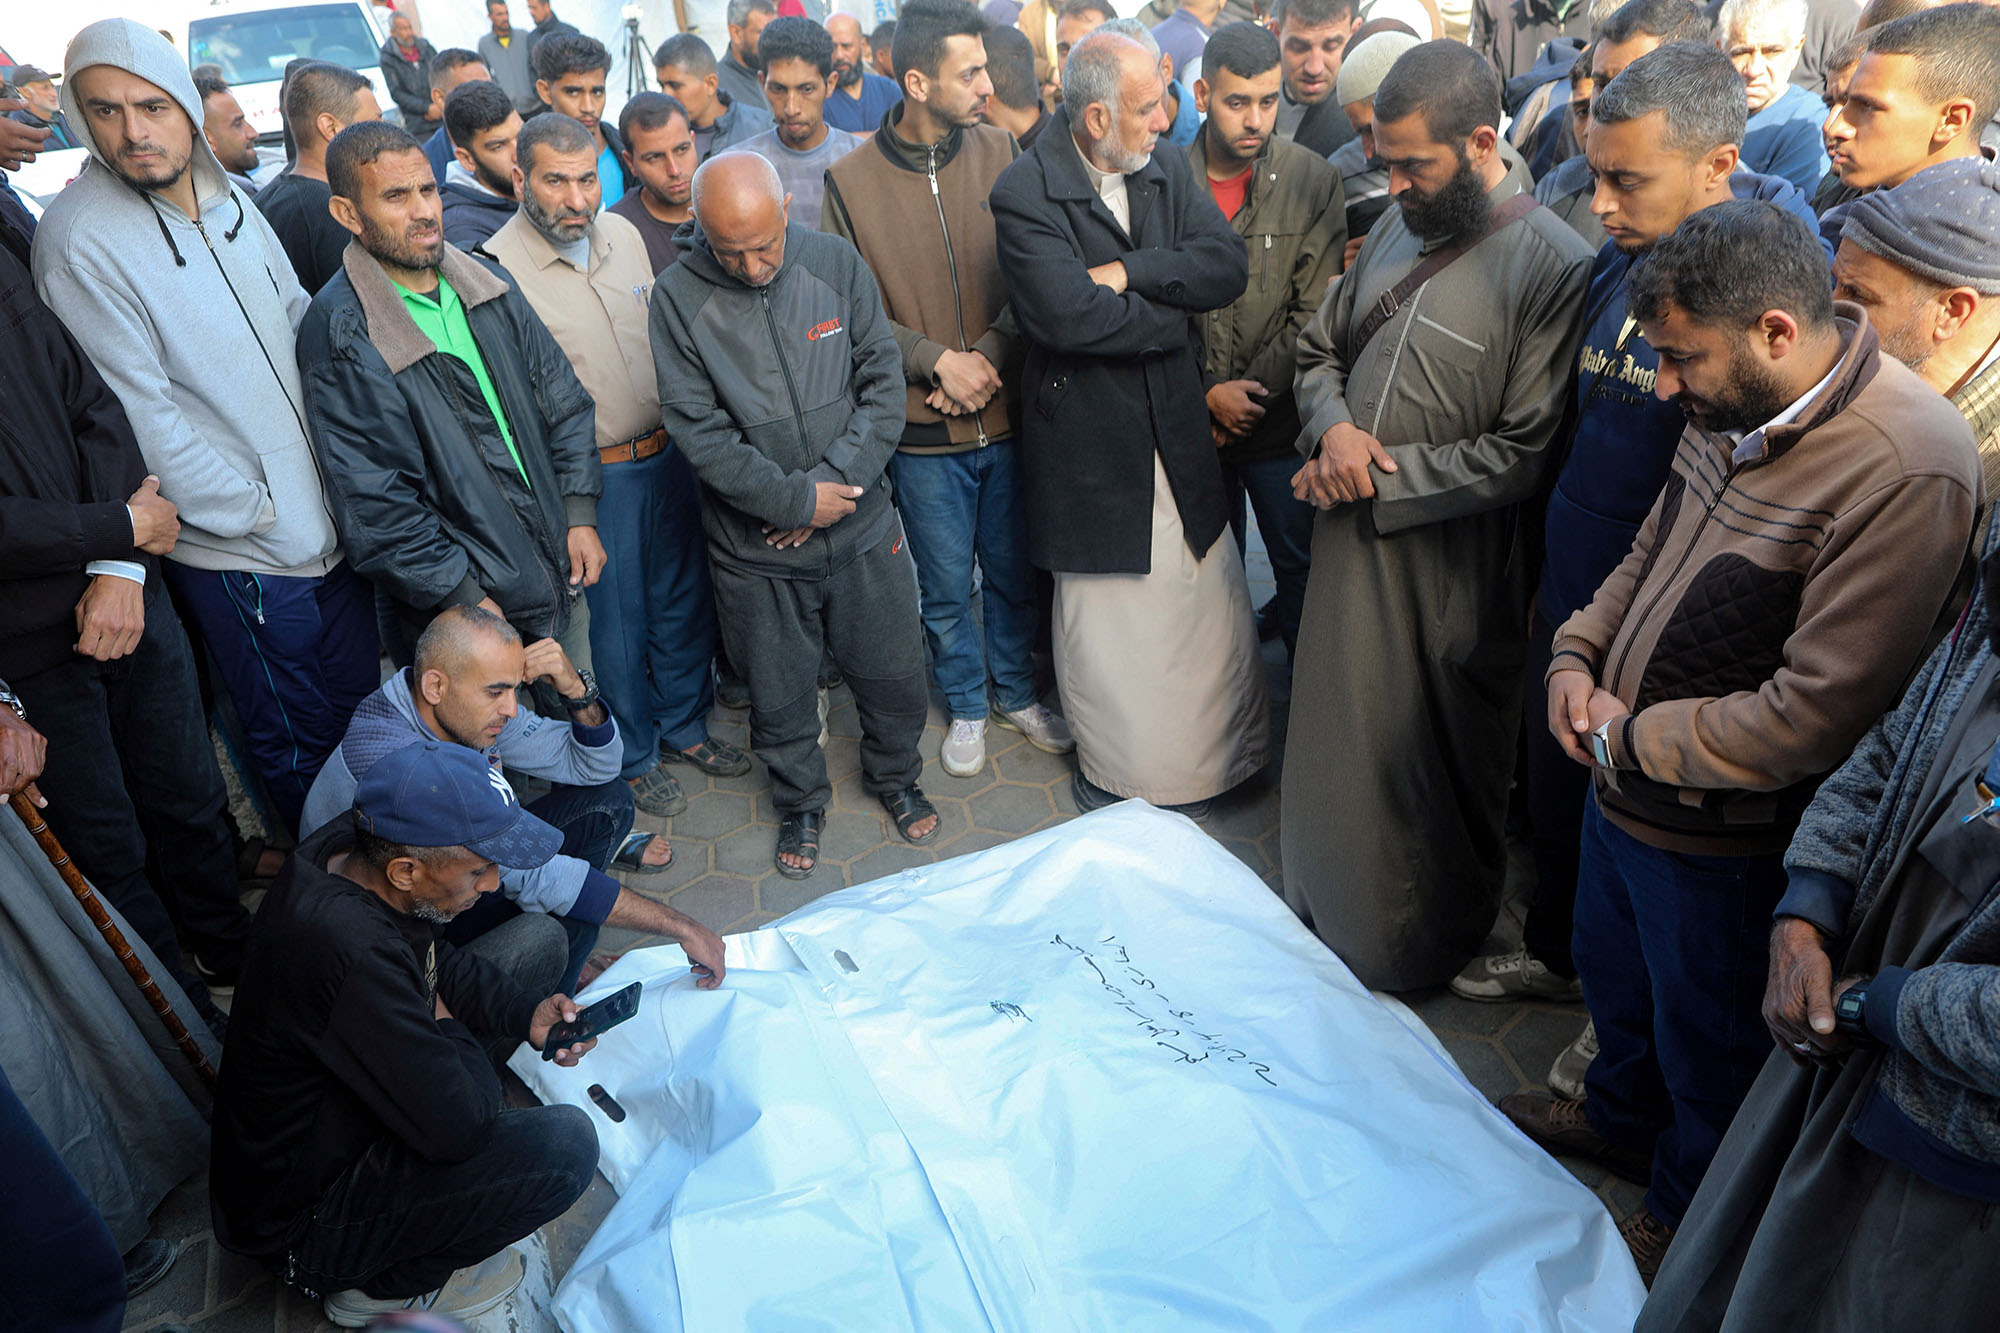 Mourners gather next to the bodies of Palestinians, including Hatem Al-Ghamri, mayor of Maghazi, who were killed in an Israeli strike in Gaza on April 9.